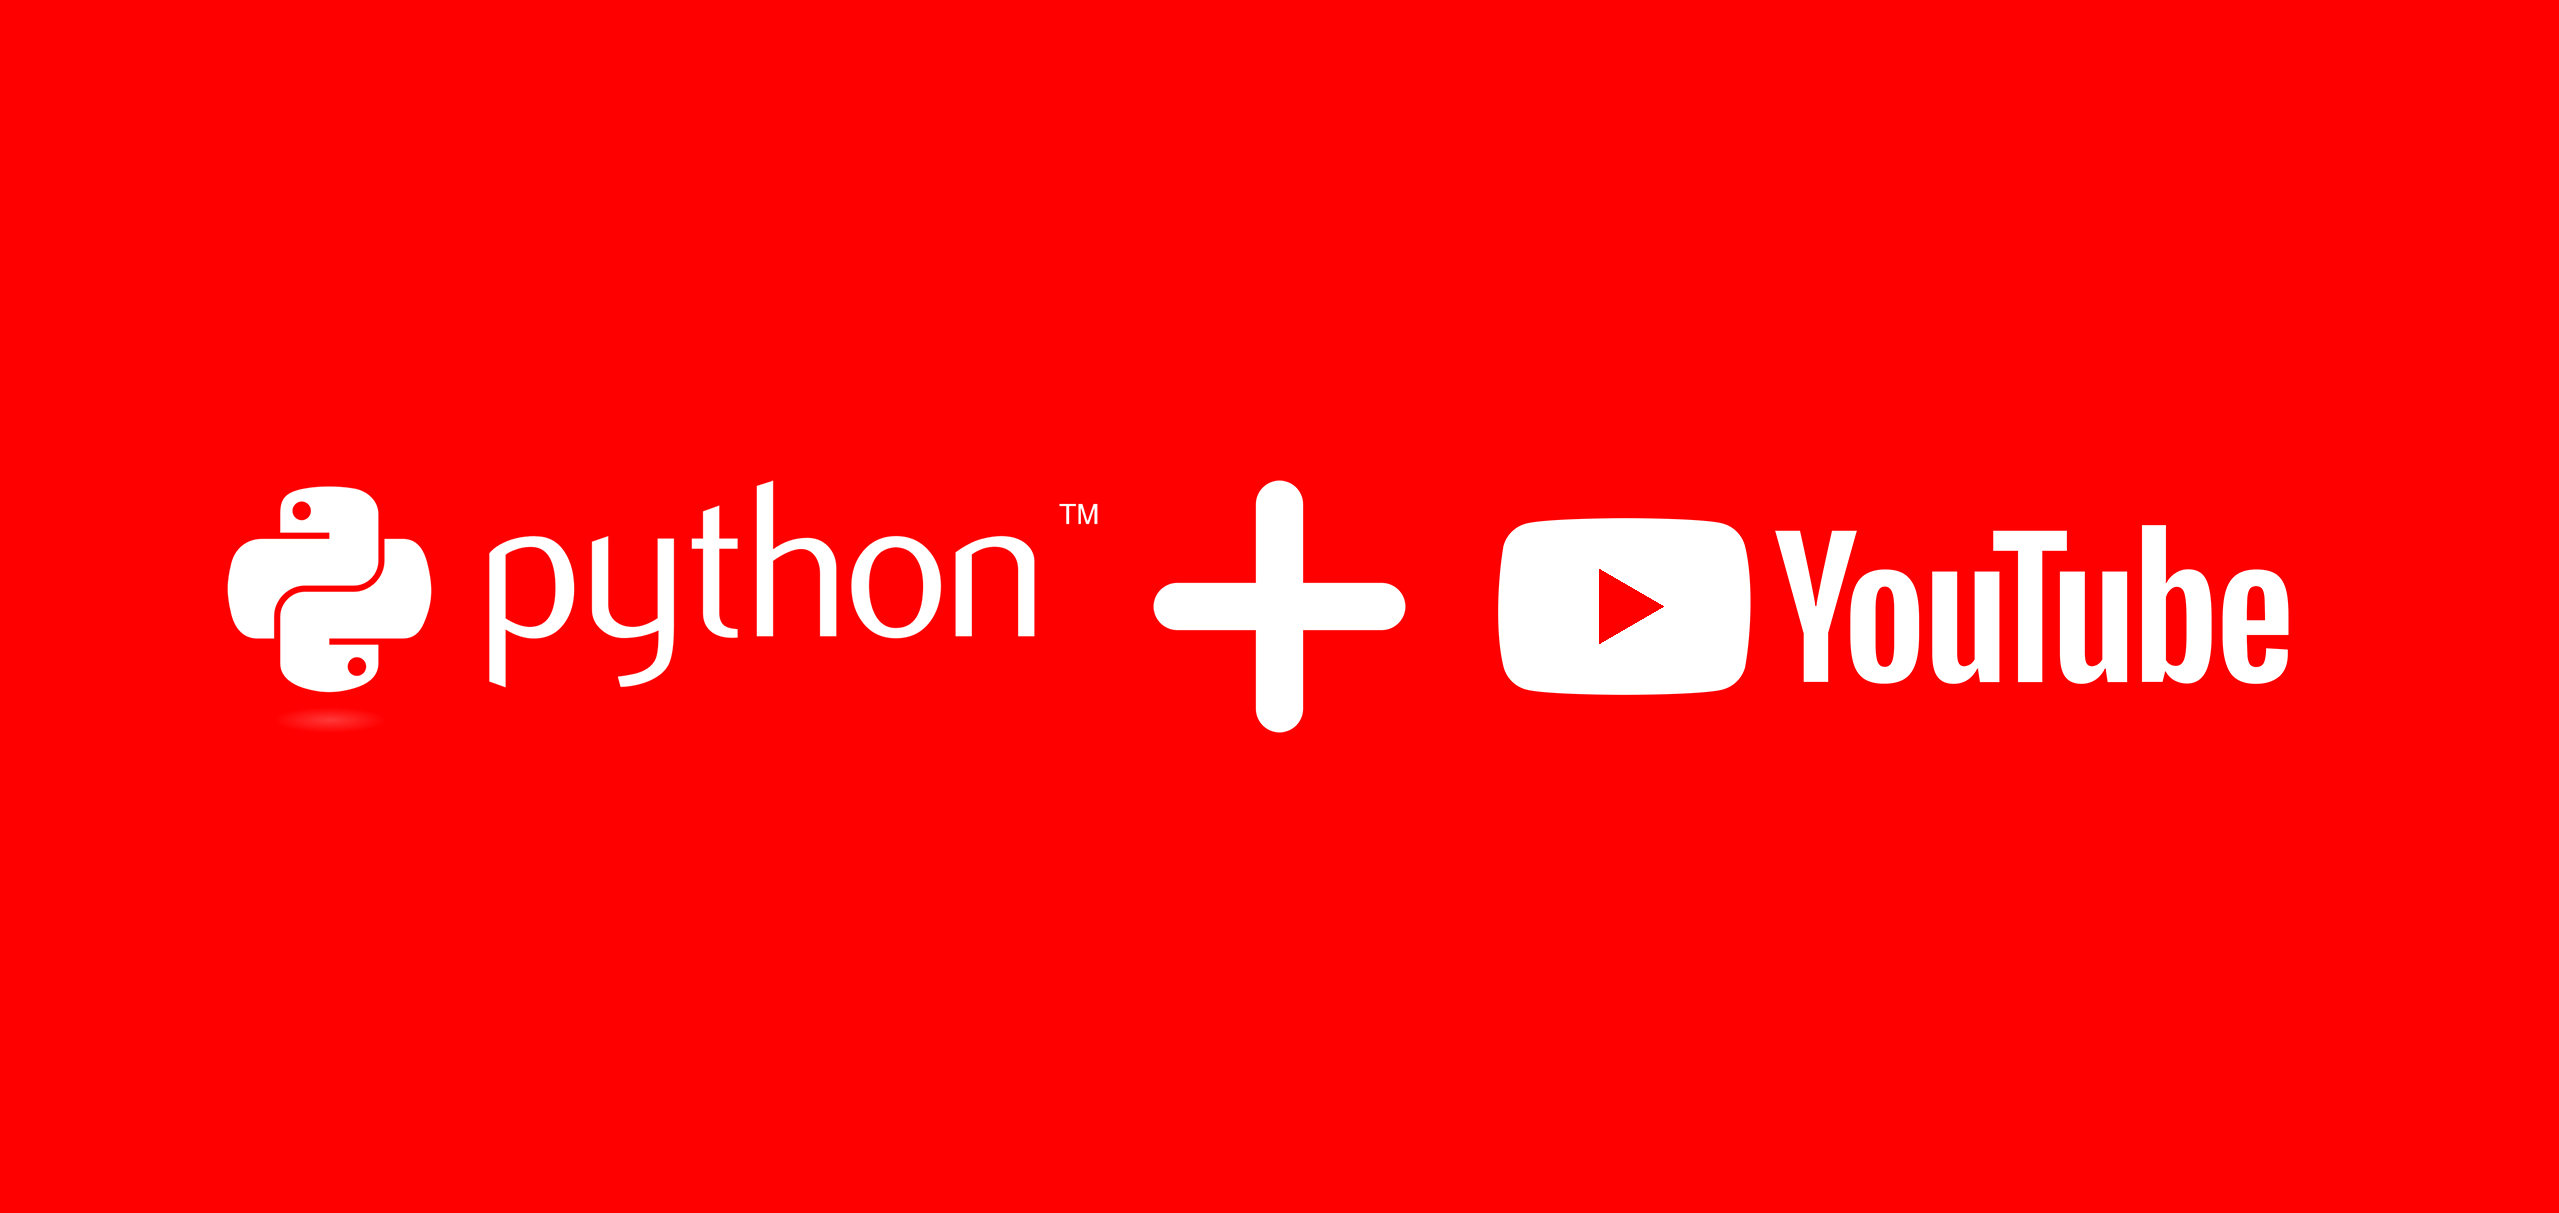 How To Scrape Youtube Video Views With Python